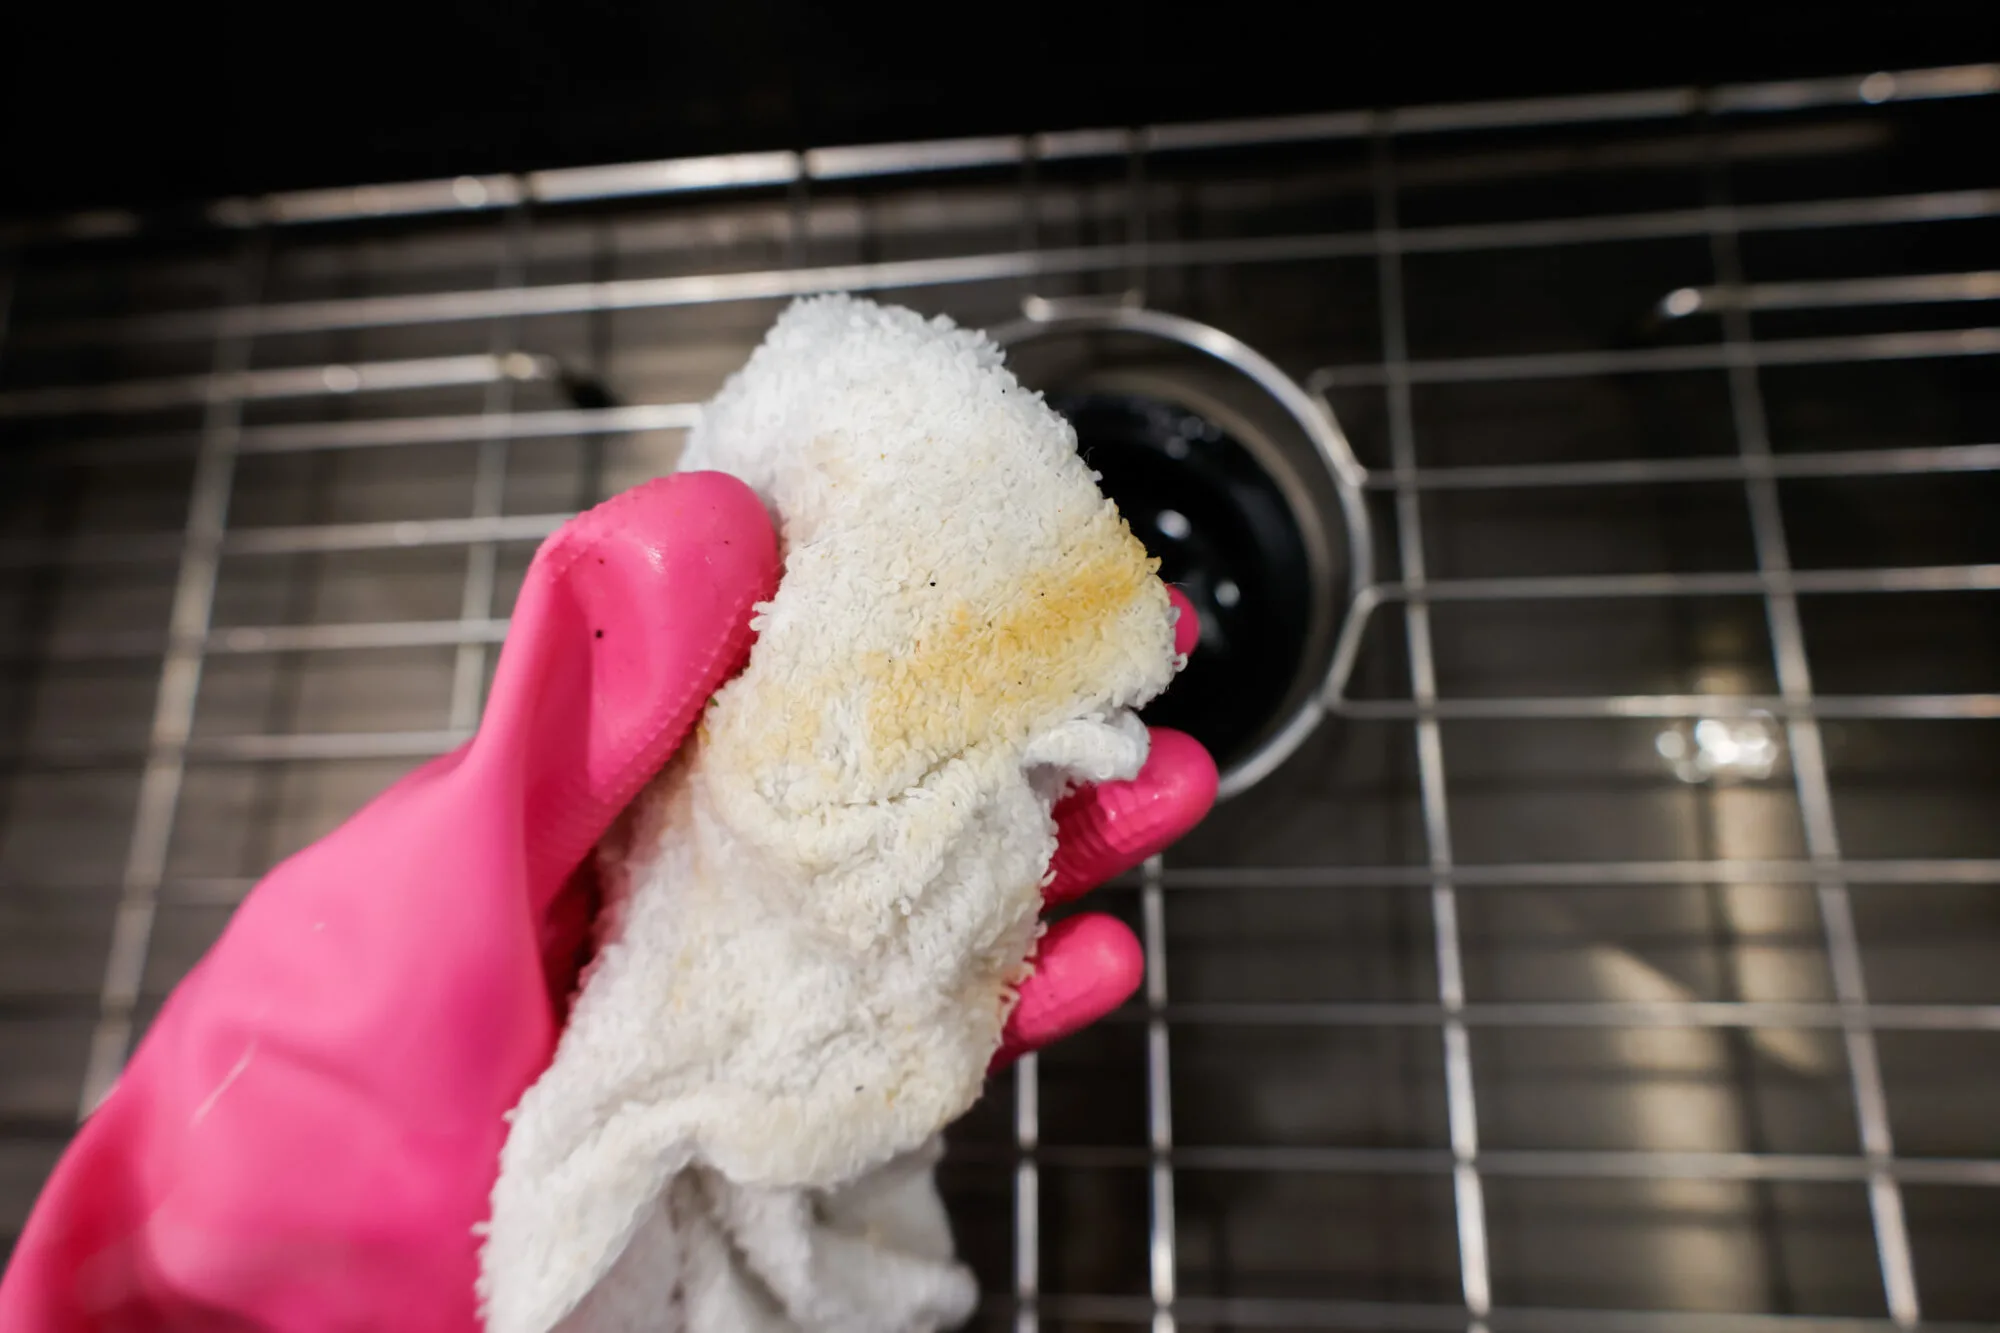 grime on washcloth after wiping garbage disposal folds